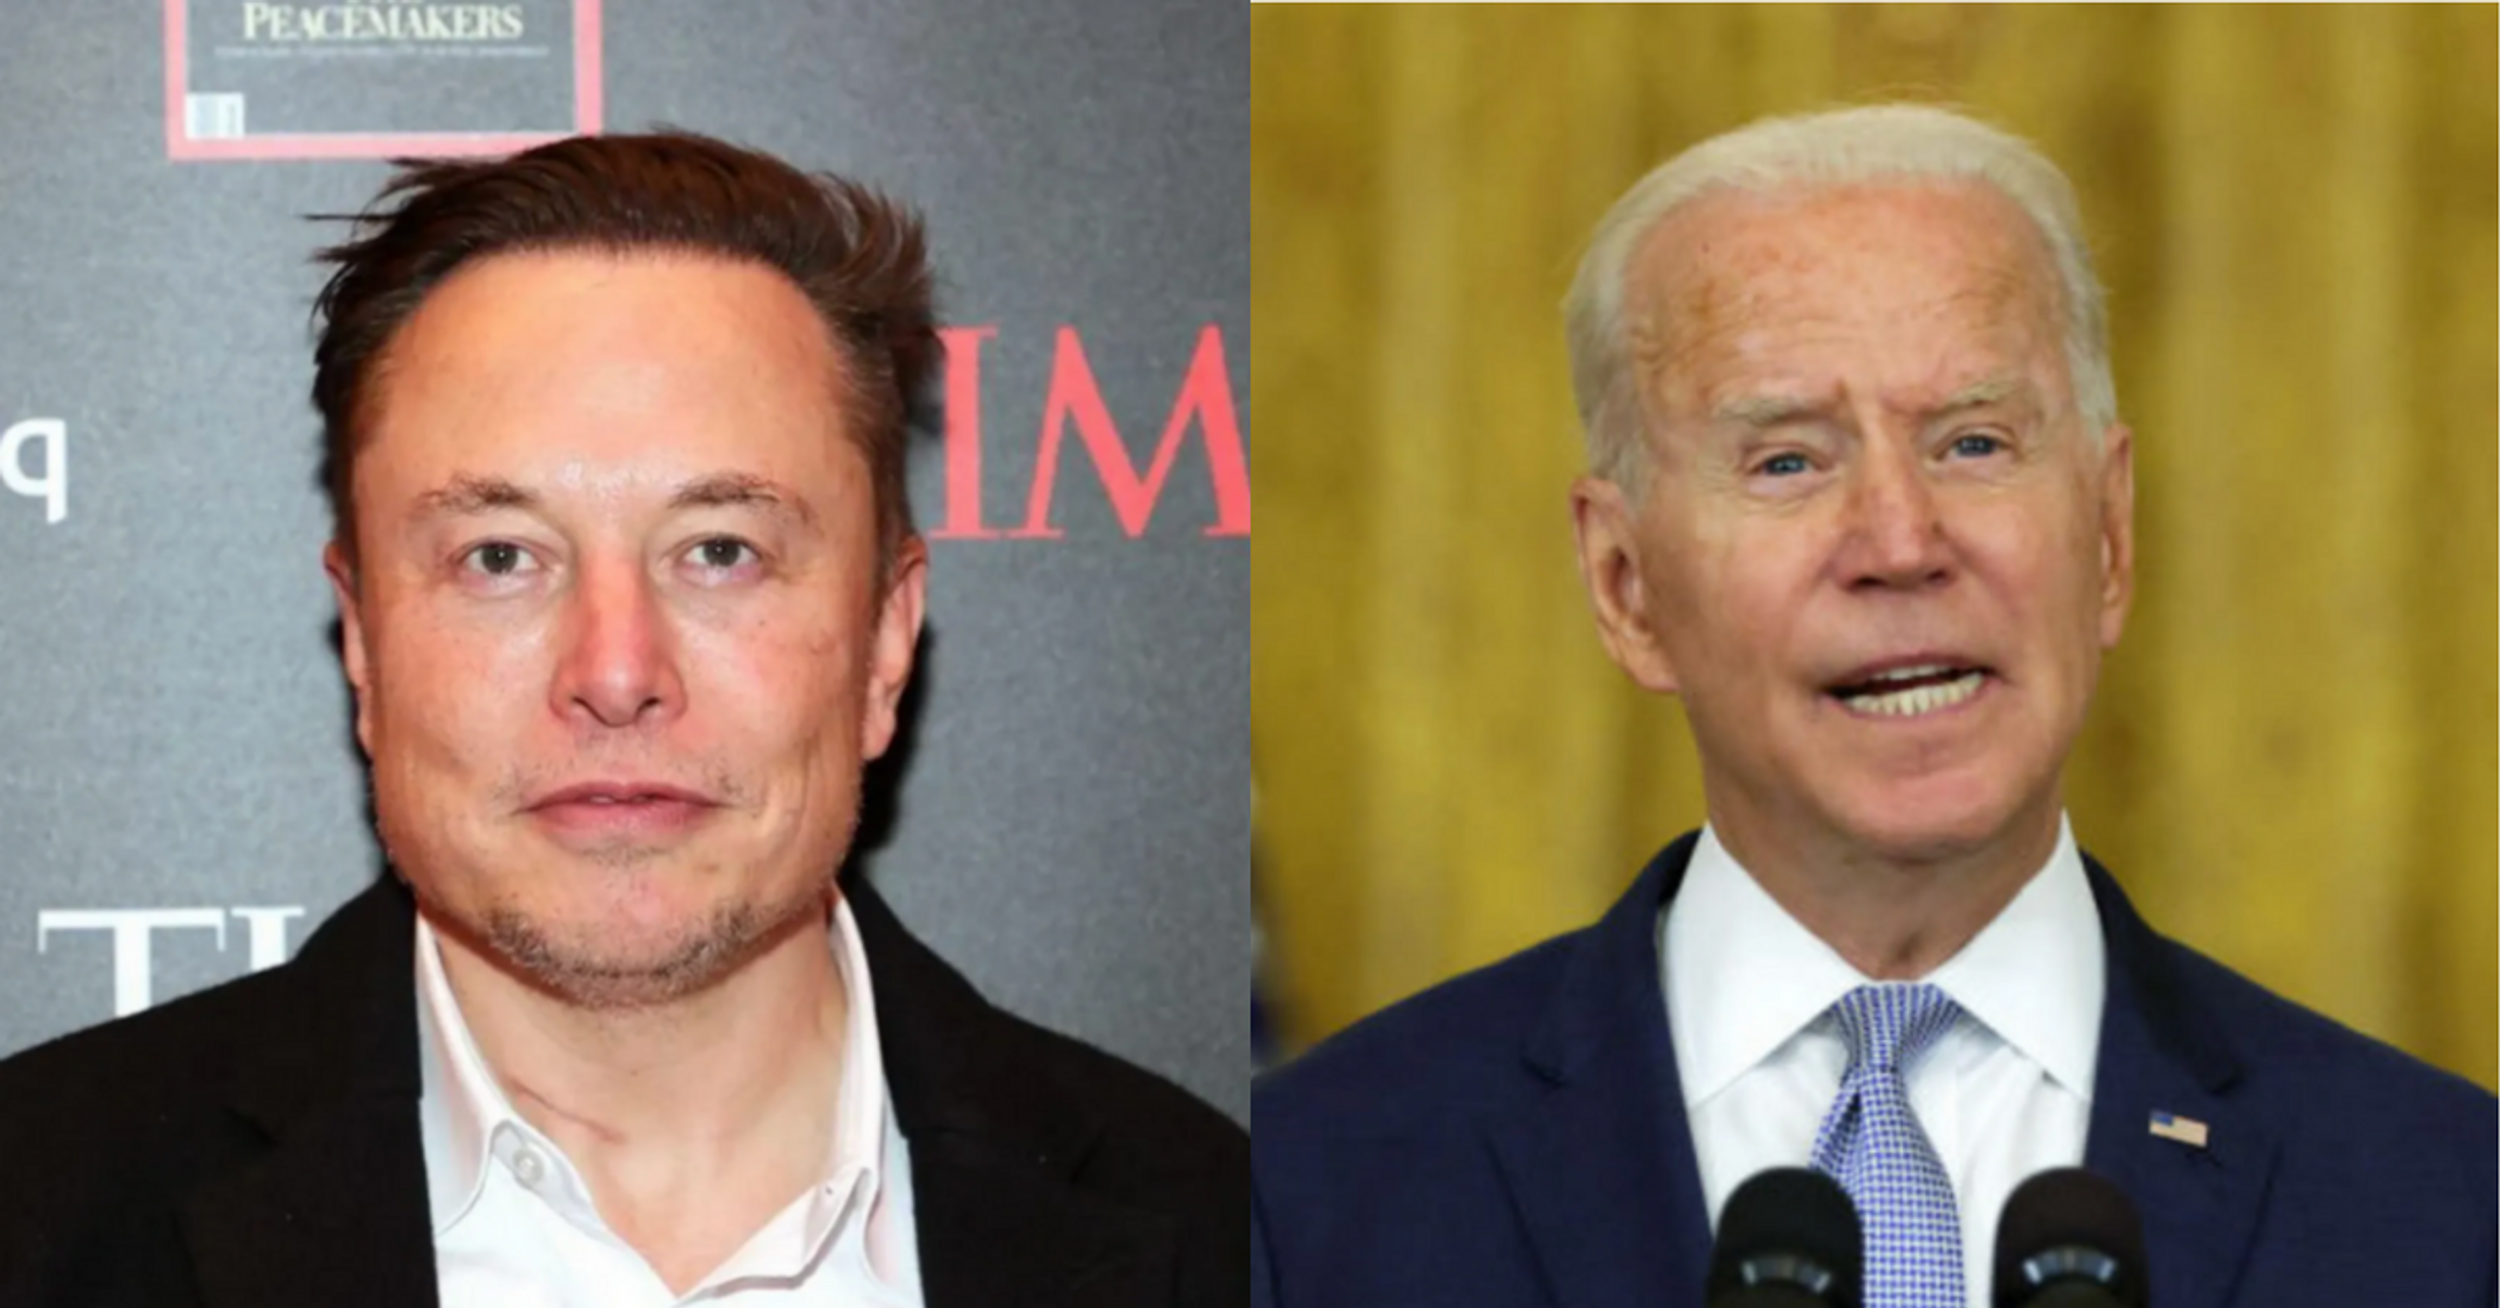 Elon Musk Gets Schooled After Tweeting Hot Take On What Biden's Biggest 'Mistake' Has Been